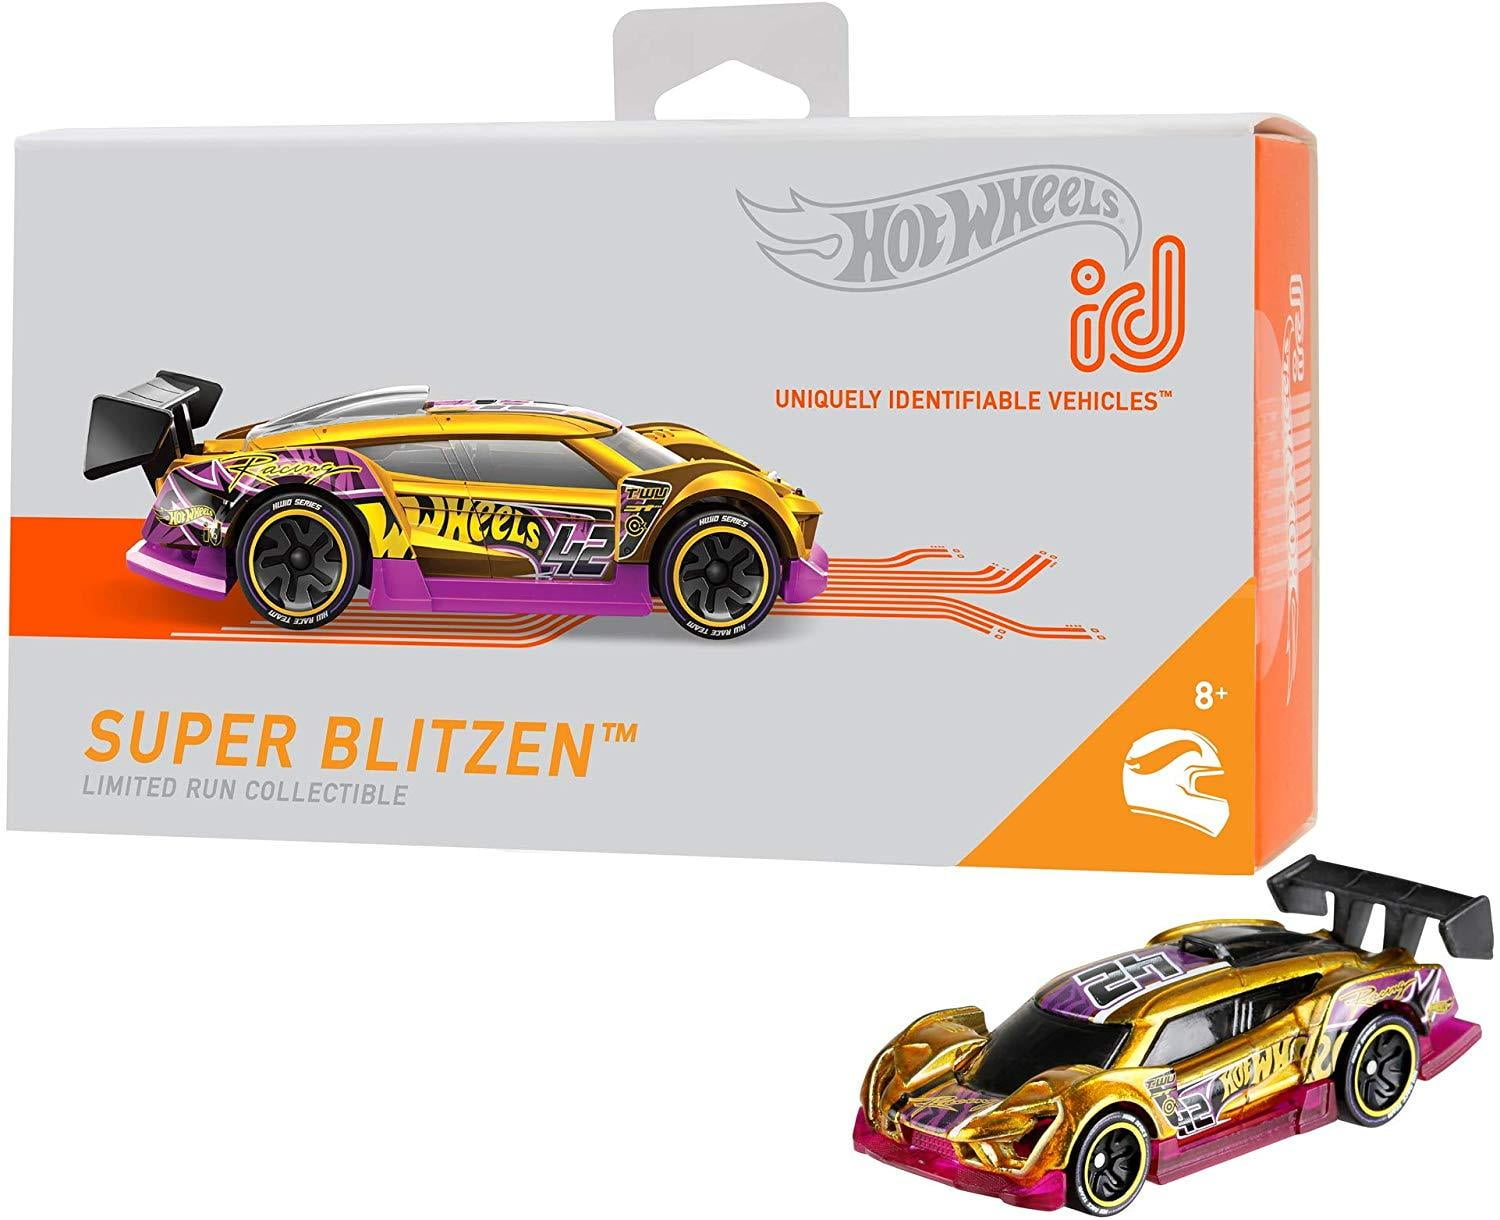 Details about   Hot Wheels® iD HOT WHEELS® RACE PORTAL Car Playset Race Track Toy with 2 Cars! 